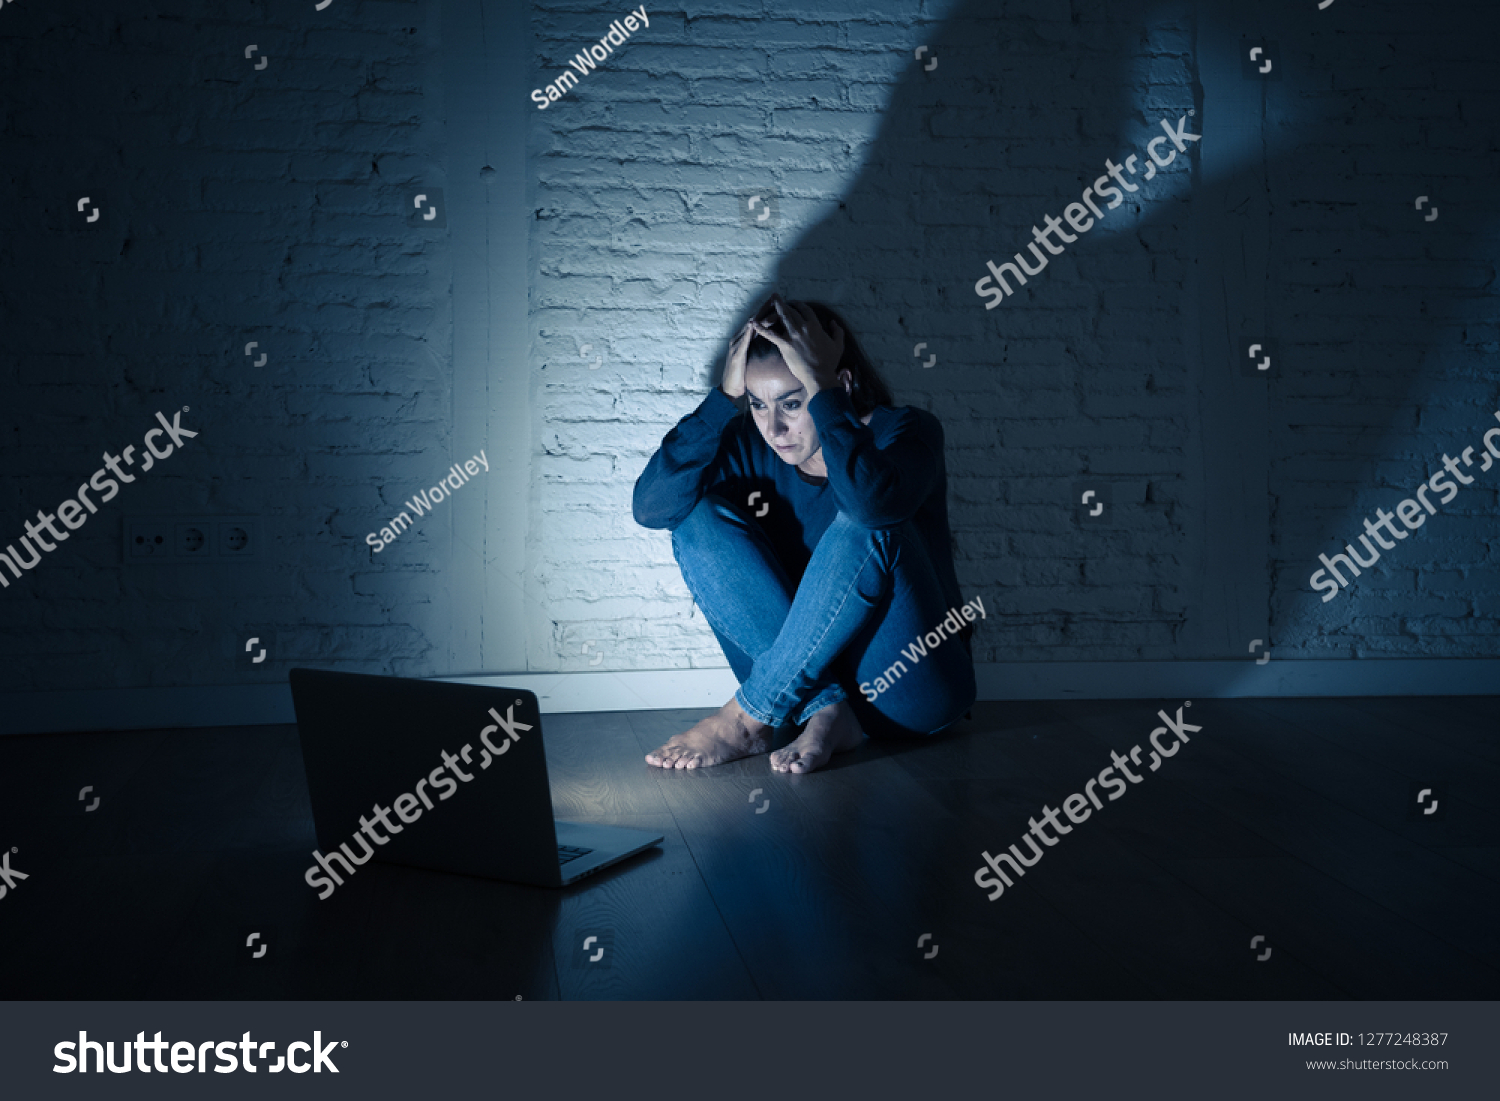 Sad and scared female Young woman with computer laptop suffering cyberbullying and harassment being online abused by stalker or gossip feeling desperate and humiliated in cyber bullying concept. #1277248387